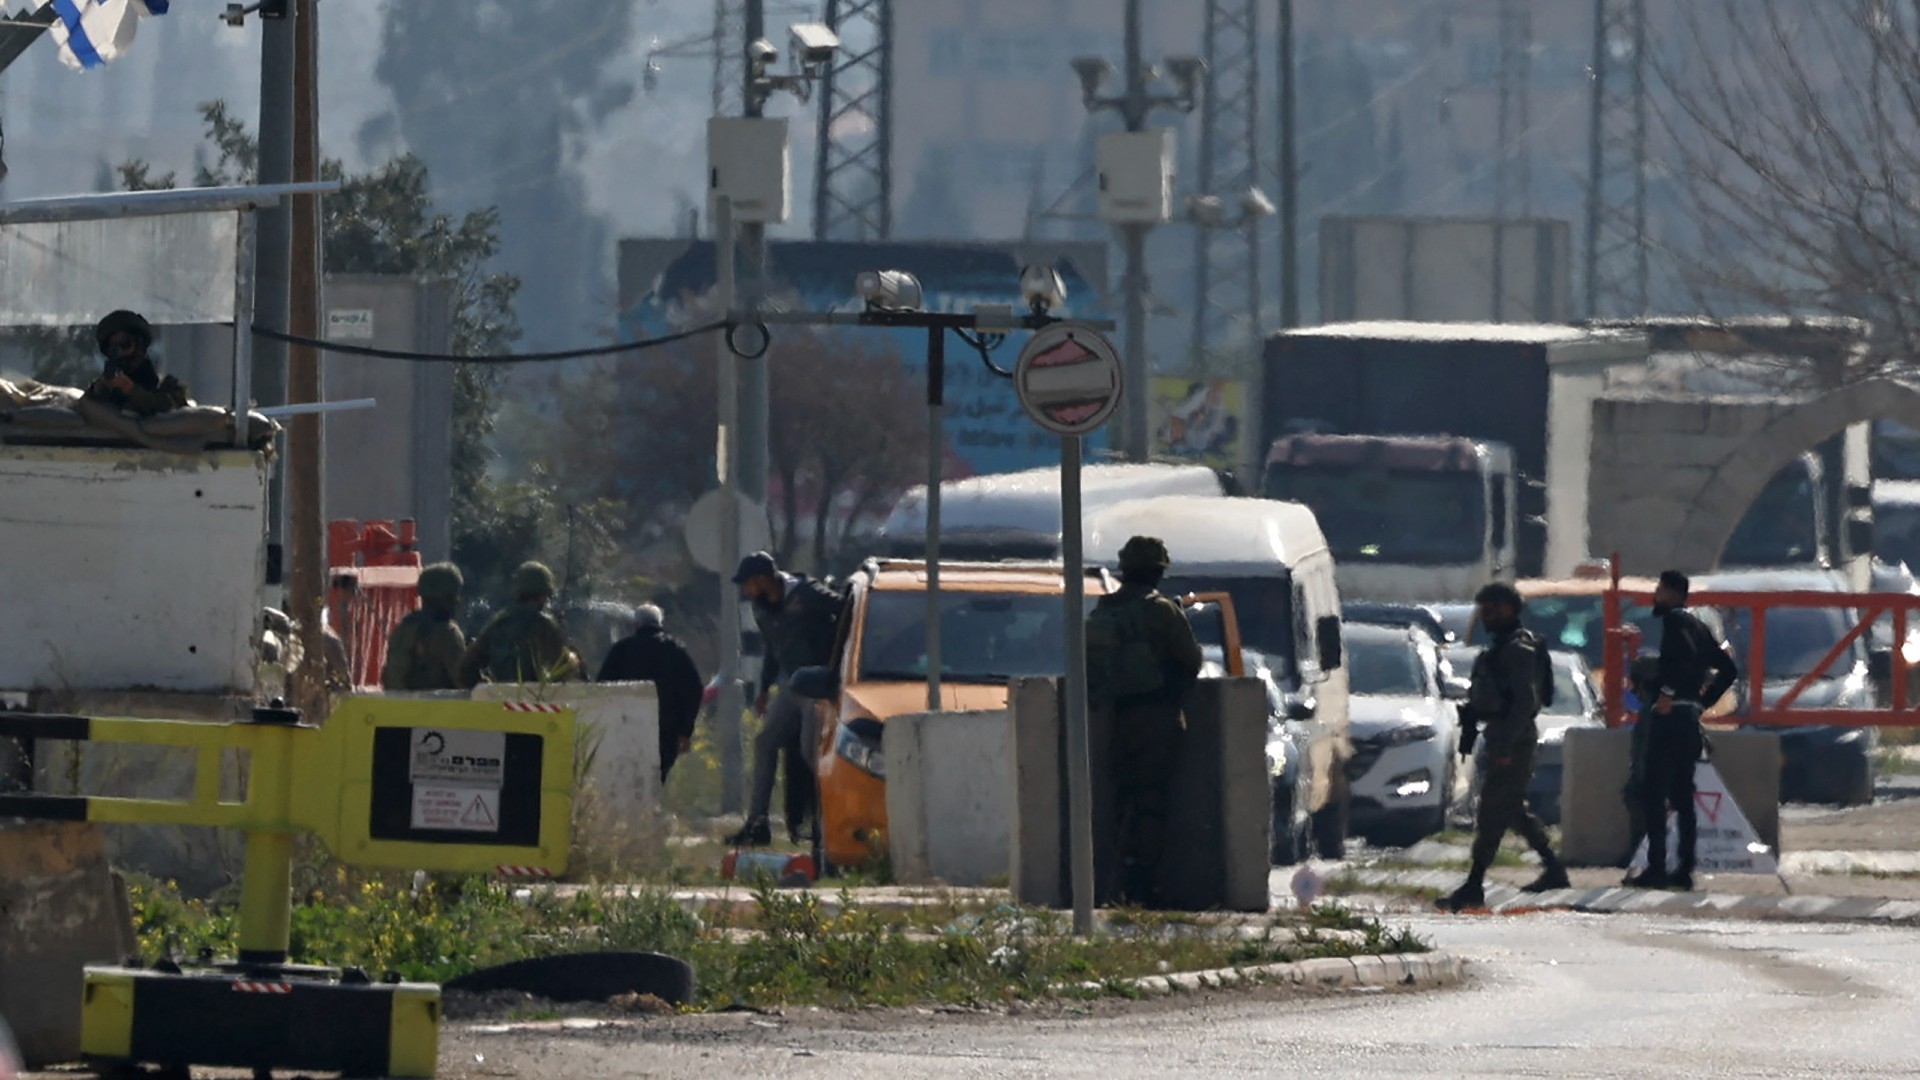 Israeli security forces search vehicles at the Hawara checkpoint, the southern entrance to Nablus city, in the occupied West Bank on 26 February 2023 (AFP)